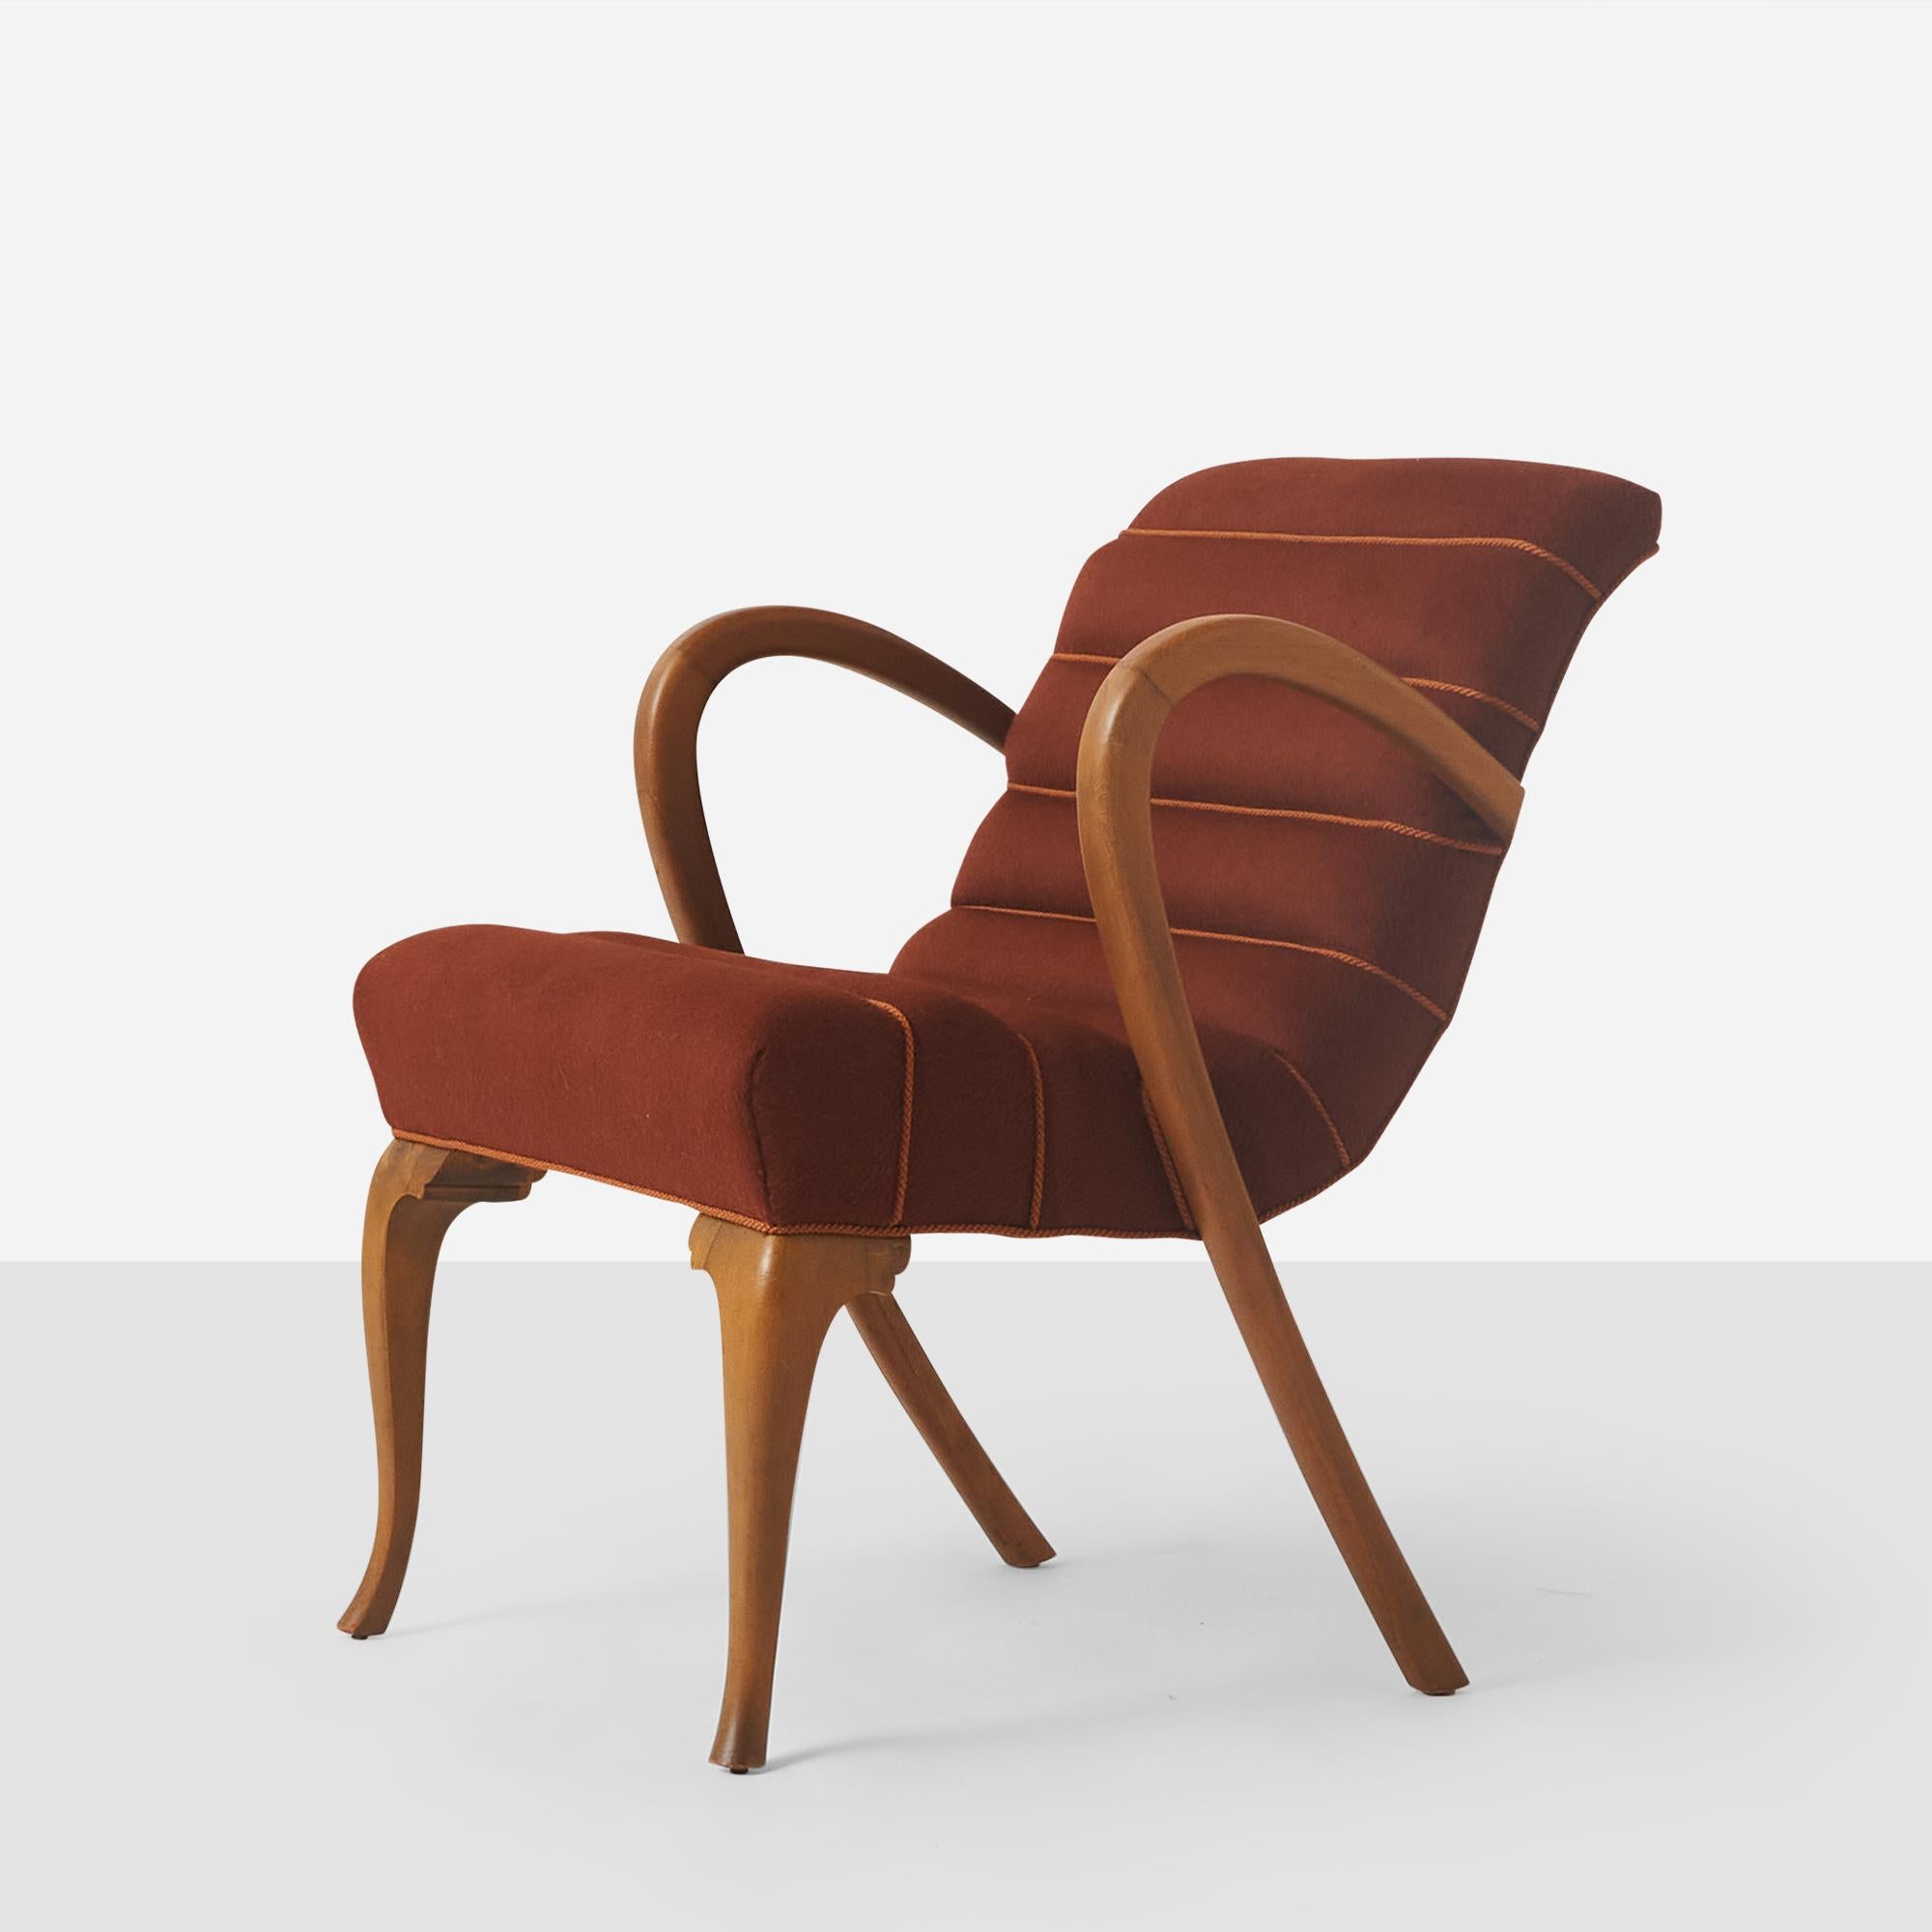 A beech framed armchair by Axel Larsson. The frame has been lightly restored. Recovered in a Sandra Jordan Prima Alpaca Brandy fabric with horizontal piping.